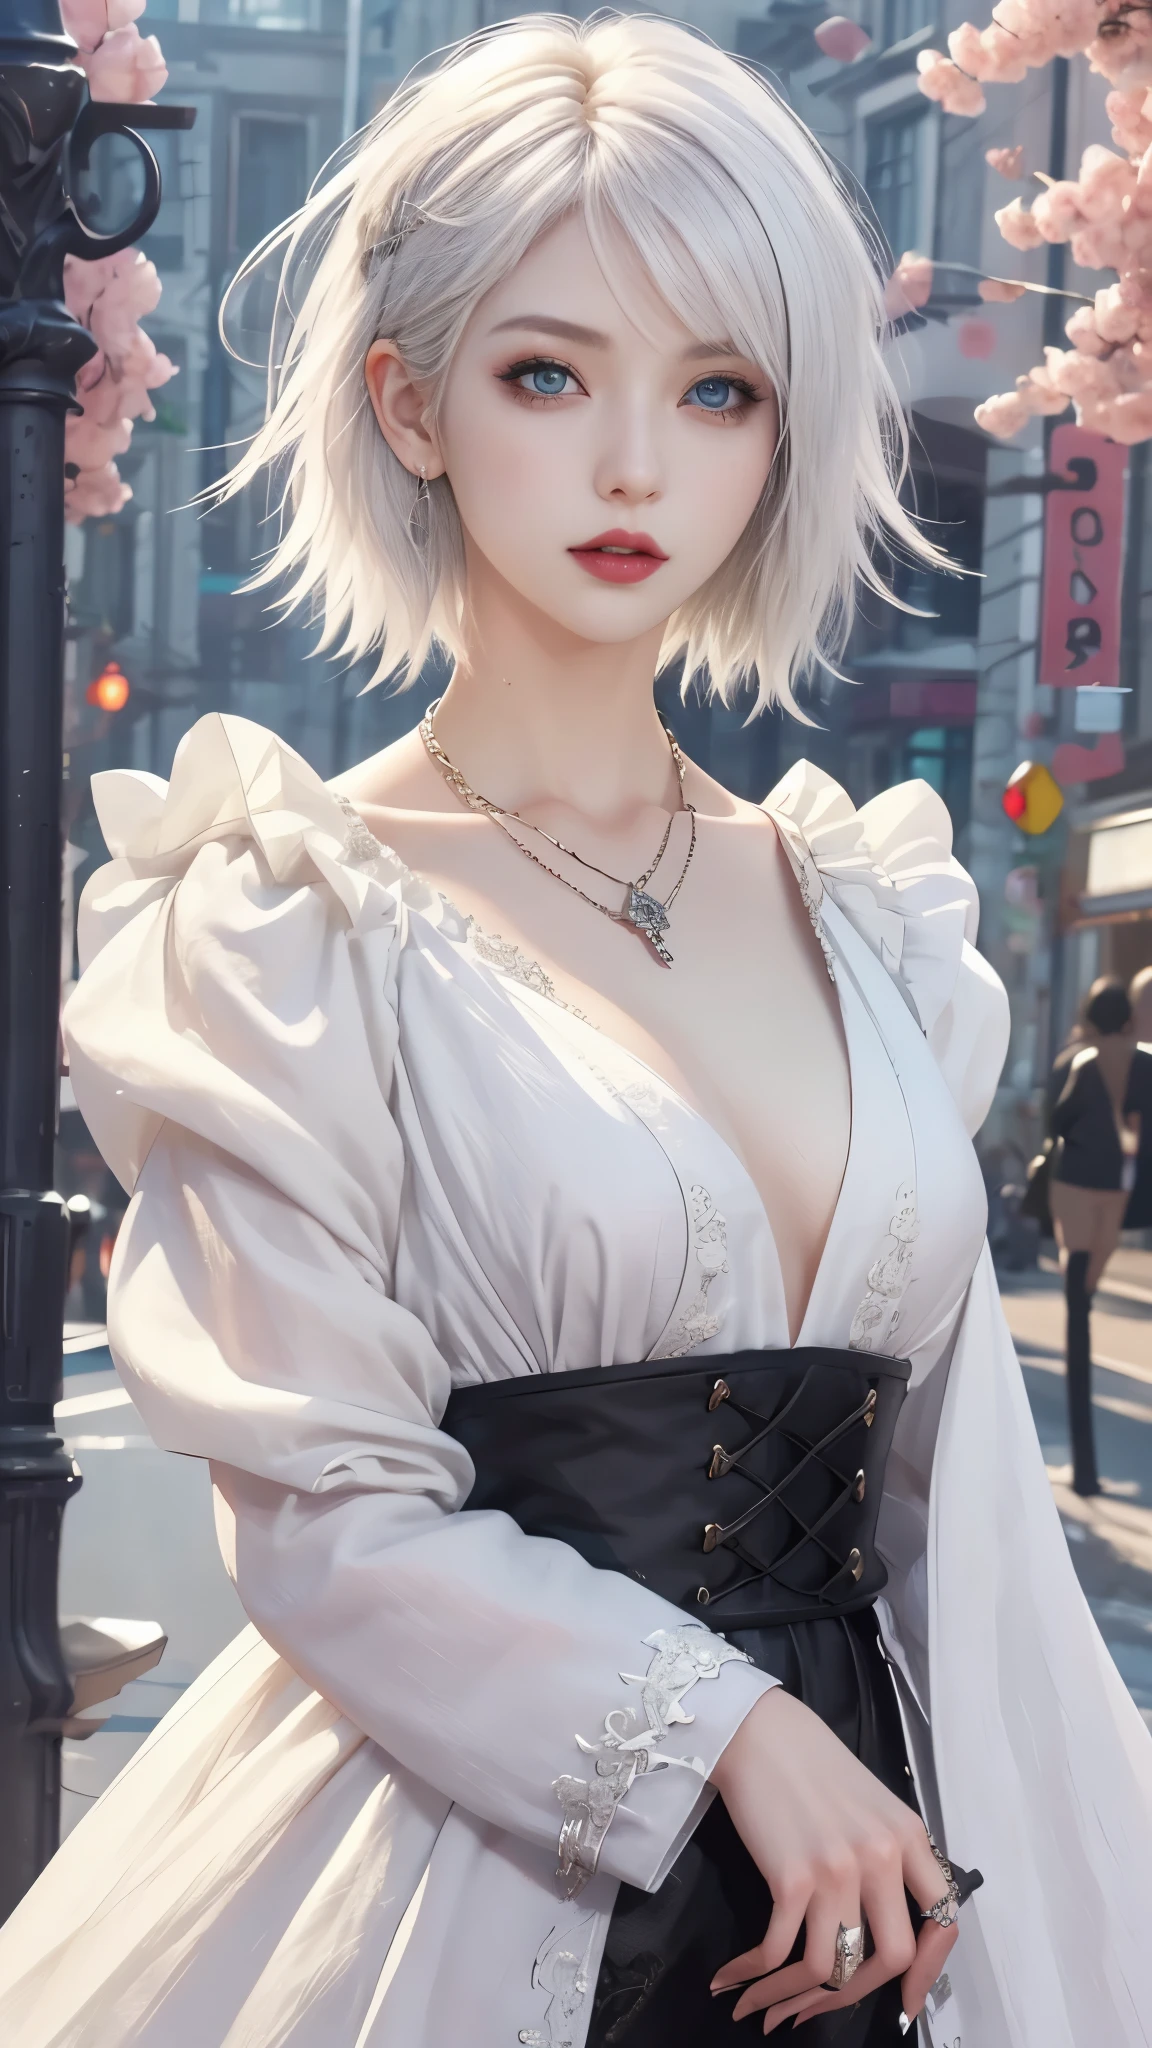 ​masterpiece, top-quality, ((1womanl)), different white color, finely eye and detailed face, intricate detailes, Casual black and white attire, window, A smile, Happiness, tenderness, high-level image quality、selfee, Beautuful Women、tall、a small face, D-cups, The upper part of the body、nightfall, nighttime scene、𝓡𝓸𝓶𝓪𝓷𝓽𝓲𝓬、Korea person, Idol Photos, Model photo, k pop, Professional Photos, Vampires, Korean fashion in black and white, Fedoman with necklace, inspired by Sim Sa-jeong, androgynous vampire, :9 detailed face: 8, extra detailed face, detailed punk hair, ((eyes are deialed)) baggy eyes, Seductive. Highly detailed, semi realistic anime, Vampires, hyperrealistic teen, Delicate androgynous princess, imvu, ((short hair woman)), white hair woman with wild look, ((Woman with short white hair)), ((1 persons)),